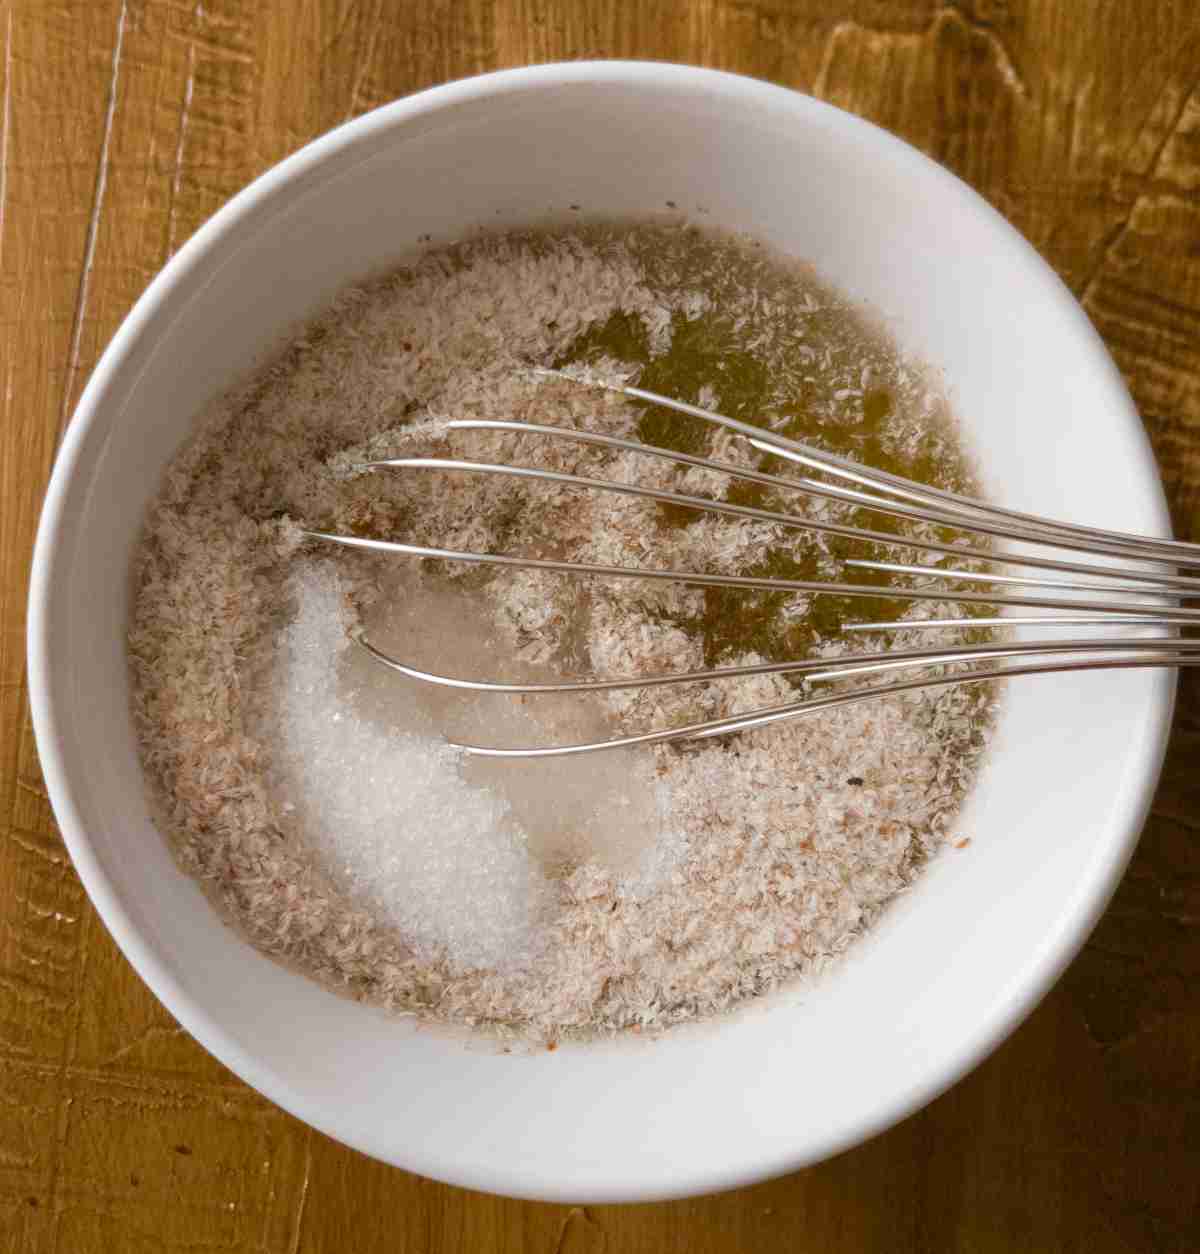 Psyllium husk mixed with the other wet ingredients.